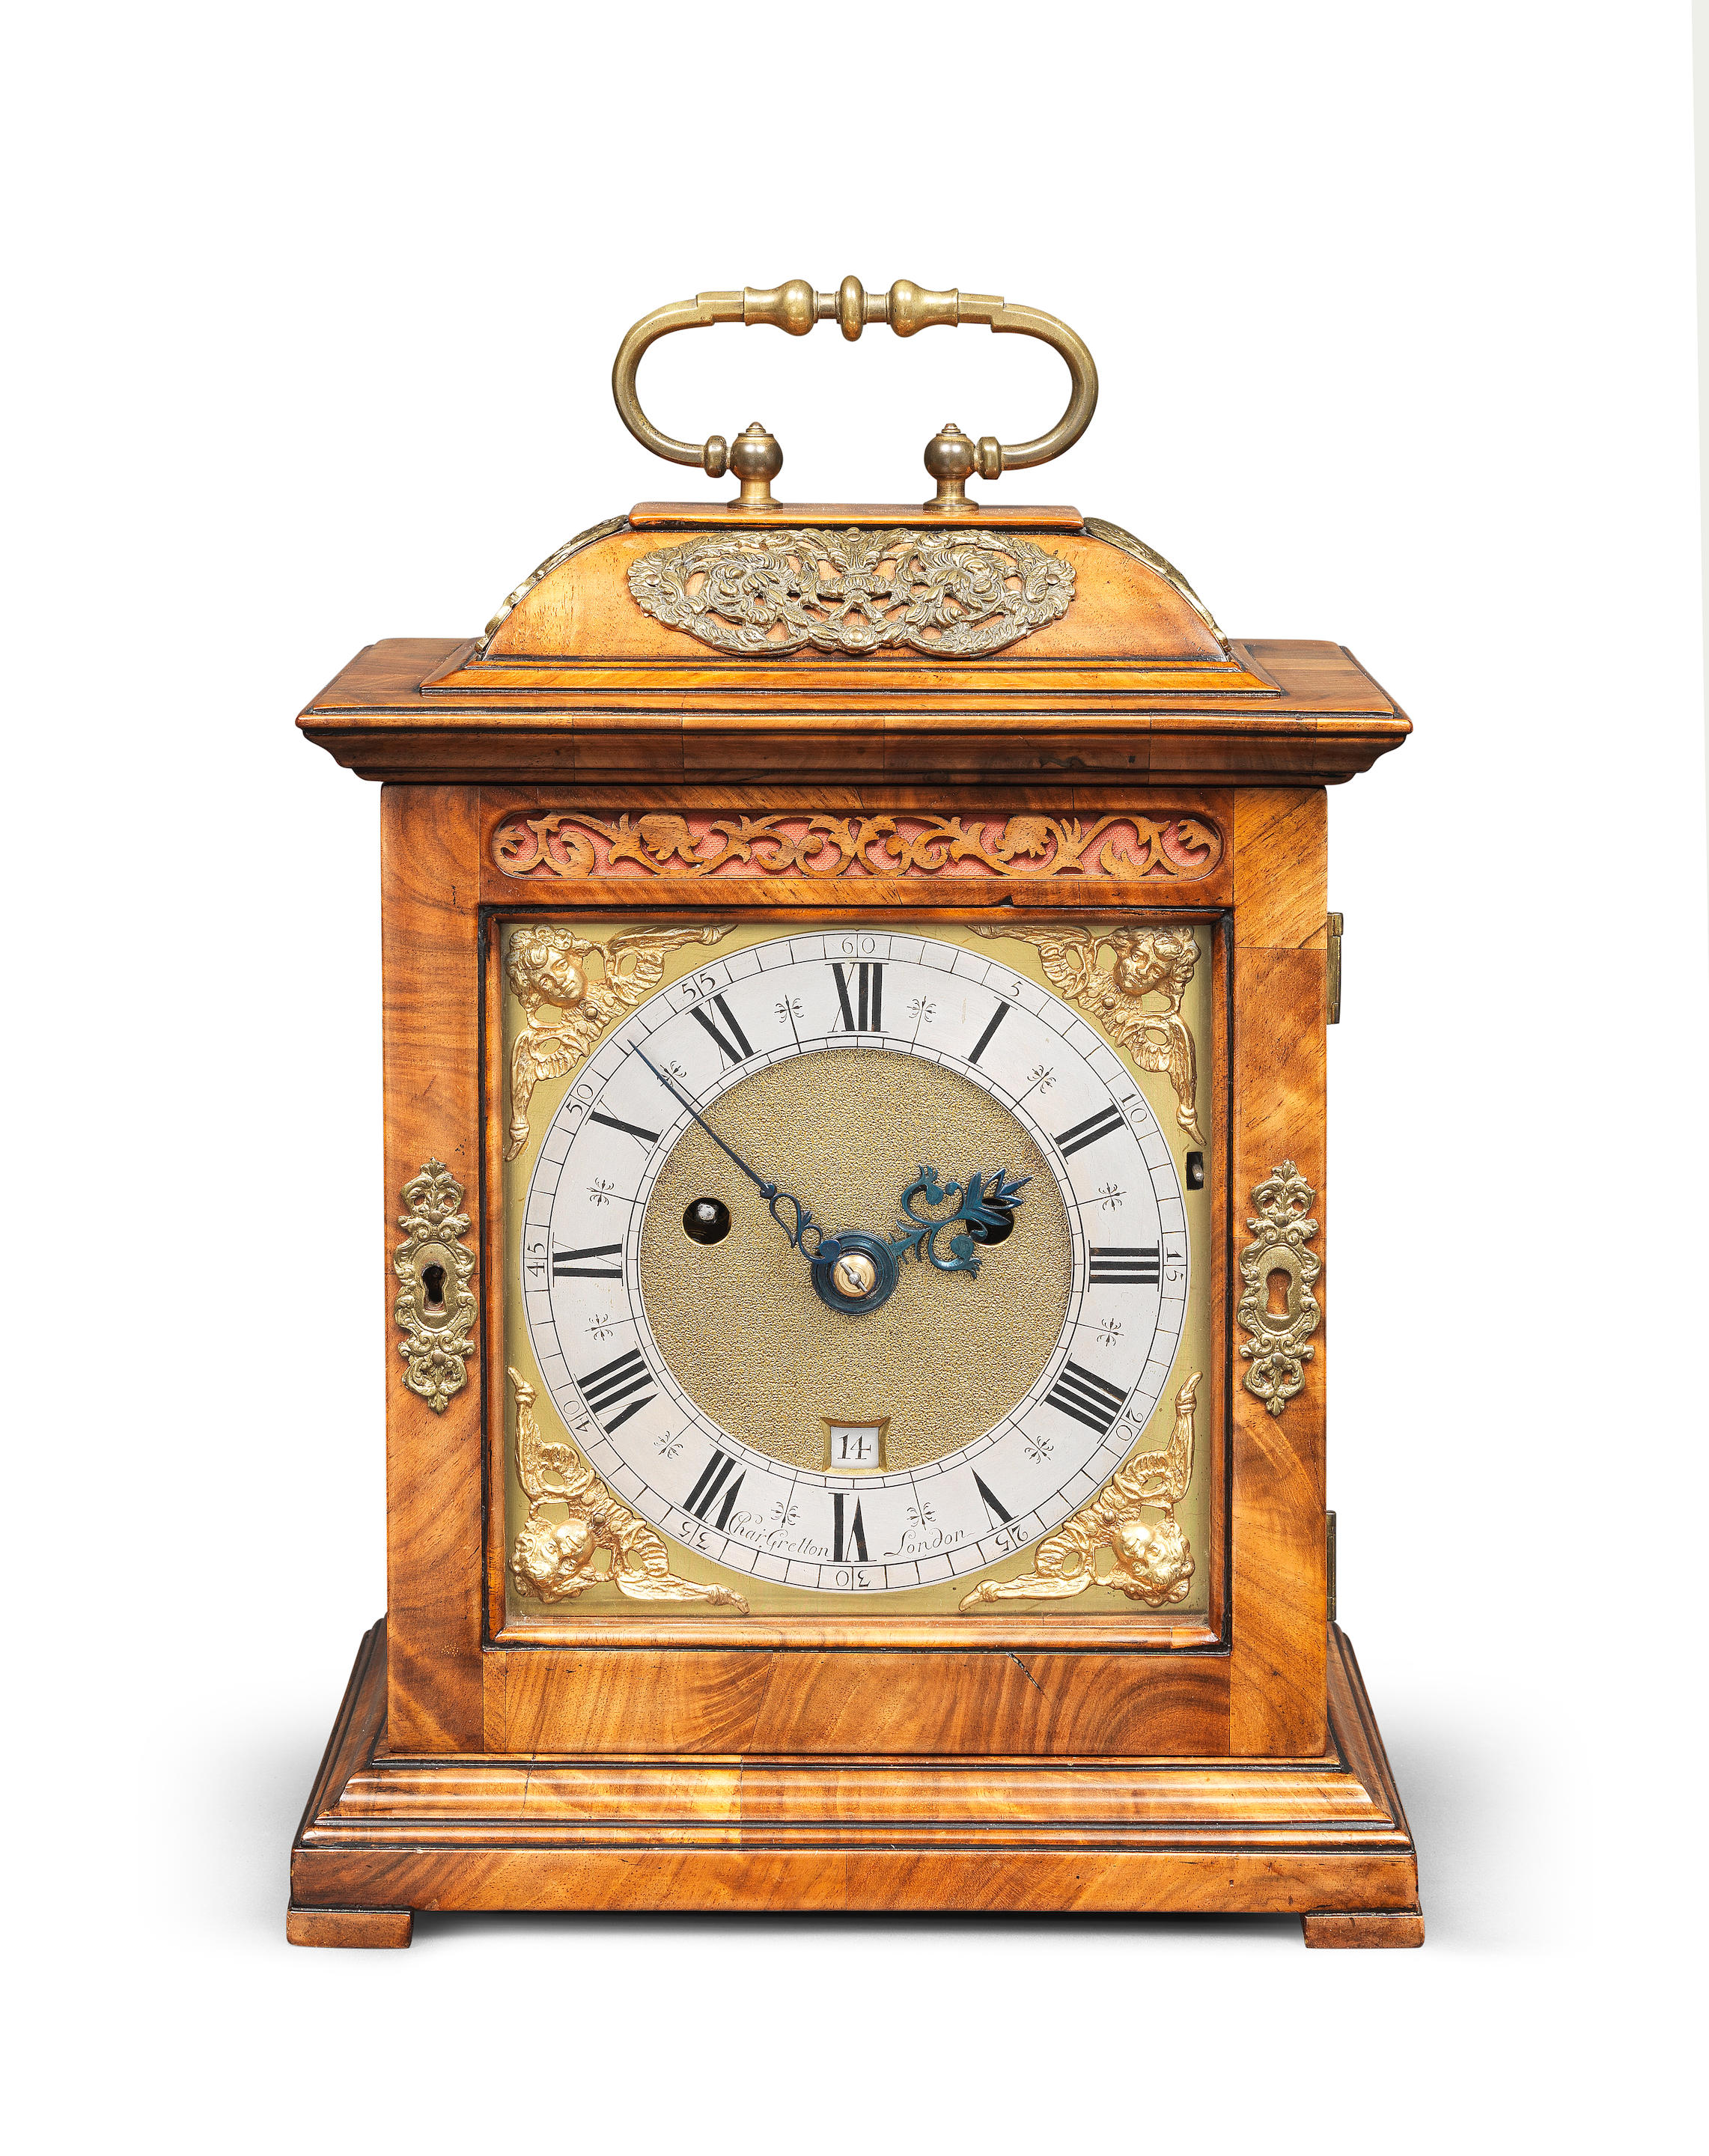 Bonhams A Rare Miniature Walnut Table Clock With Published Provenance The Movement And Dial By